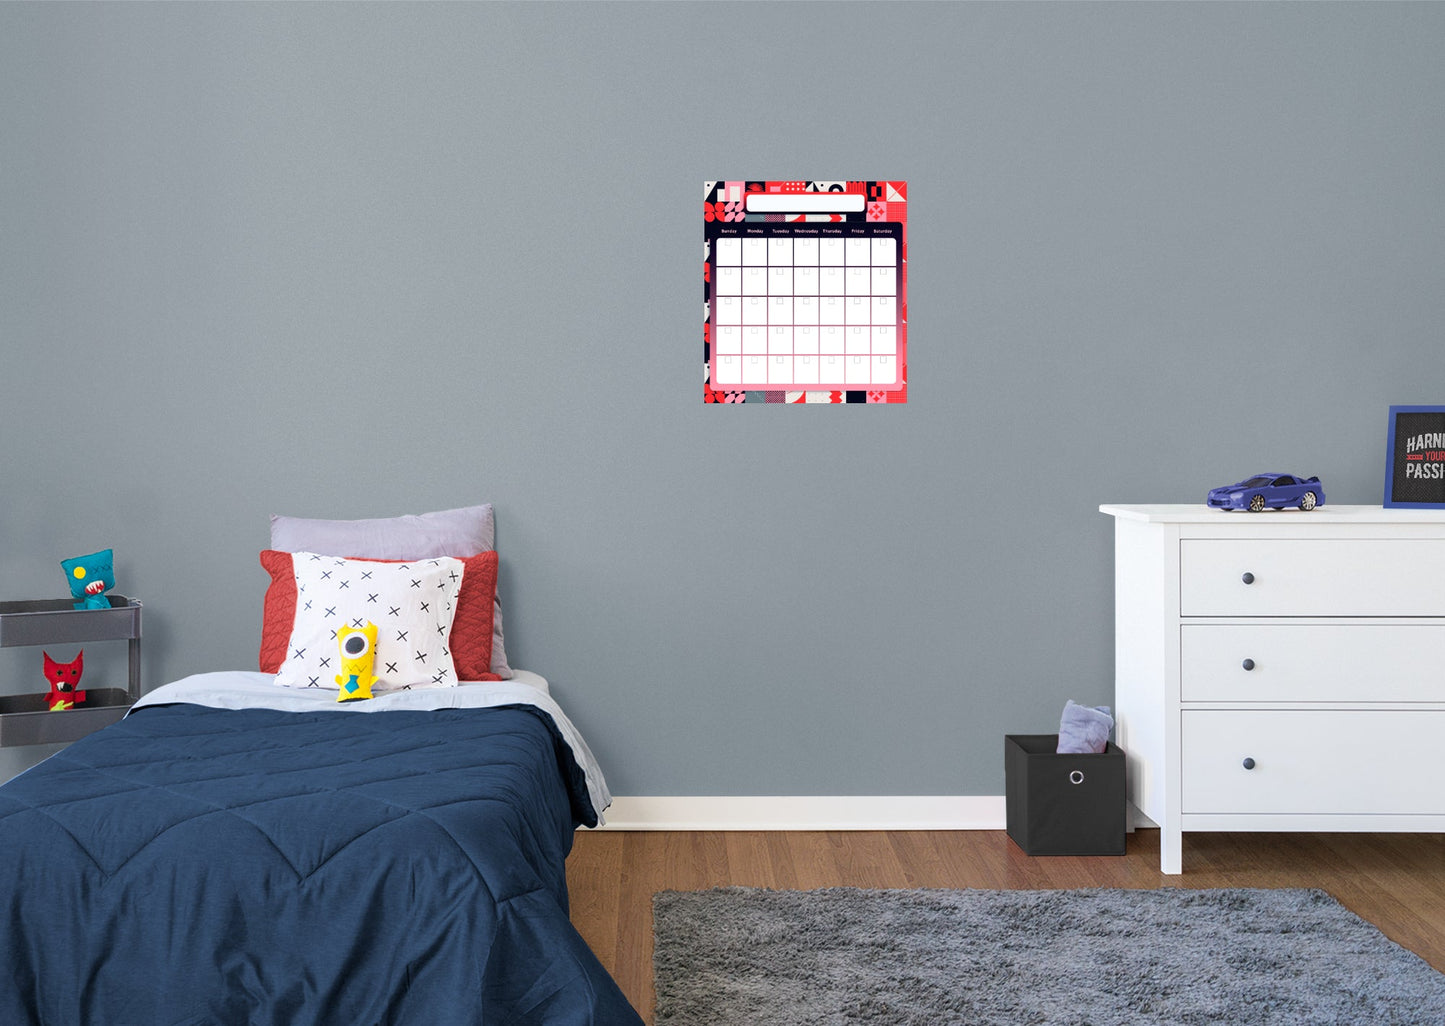 Calendars: Geometric One Month Calendar Dry Erase - Removable Adhesive Decal